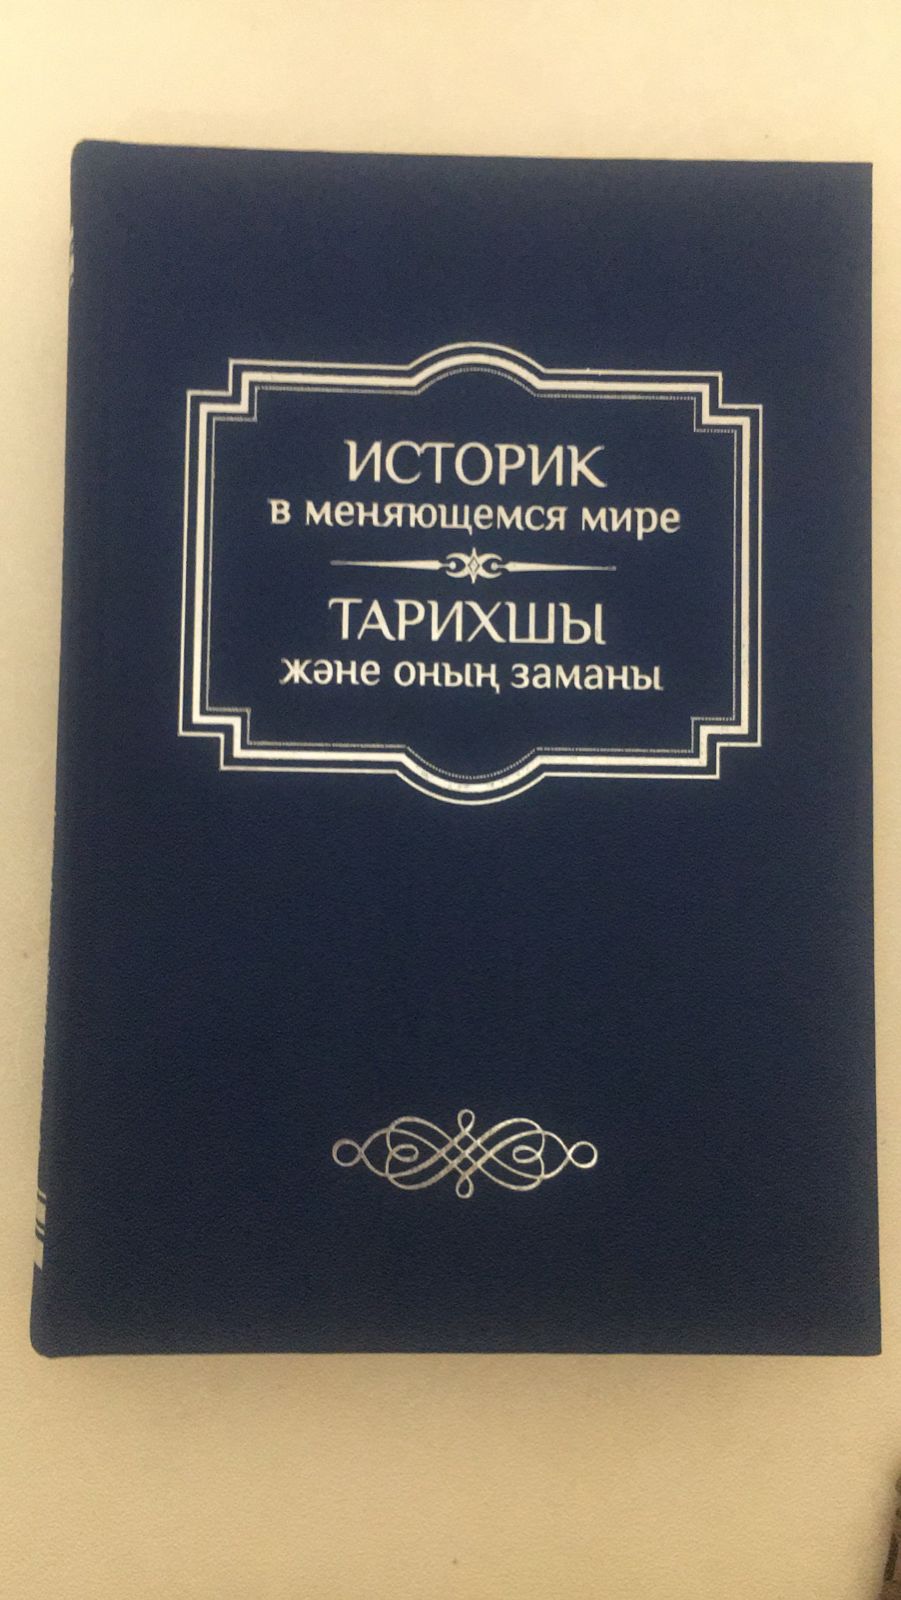 Presentation of the book for the 90th anniversary of the birth of Academician of the National Academy of Sciences of the Republic of Kazakhstan, Doctor of Historical Sciences, Professor Manash Kabashevich Kozybayev